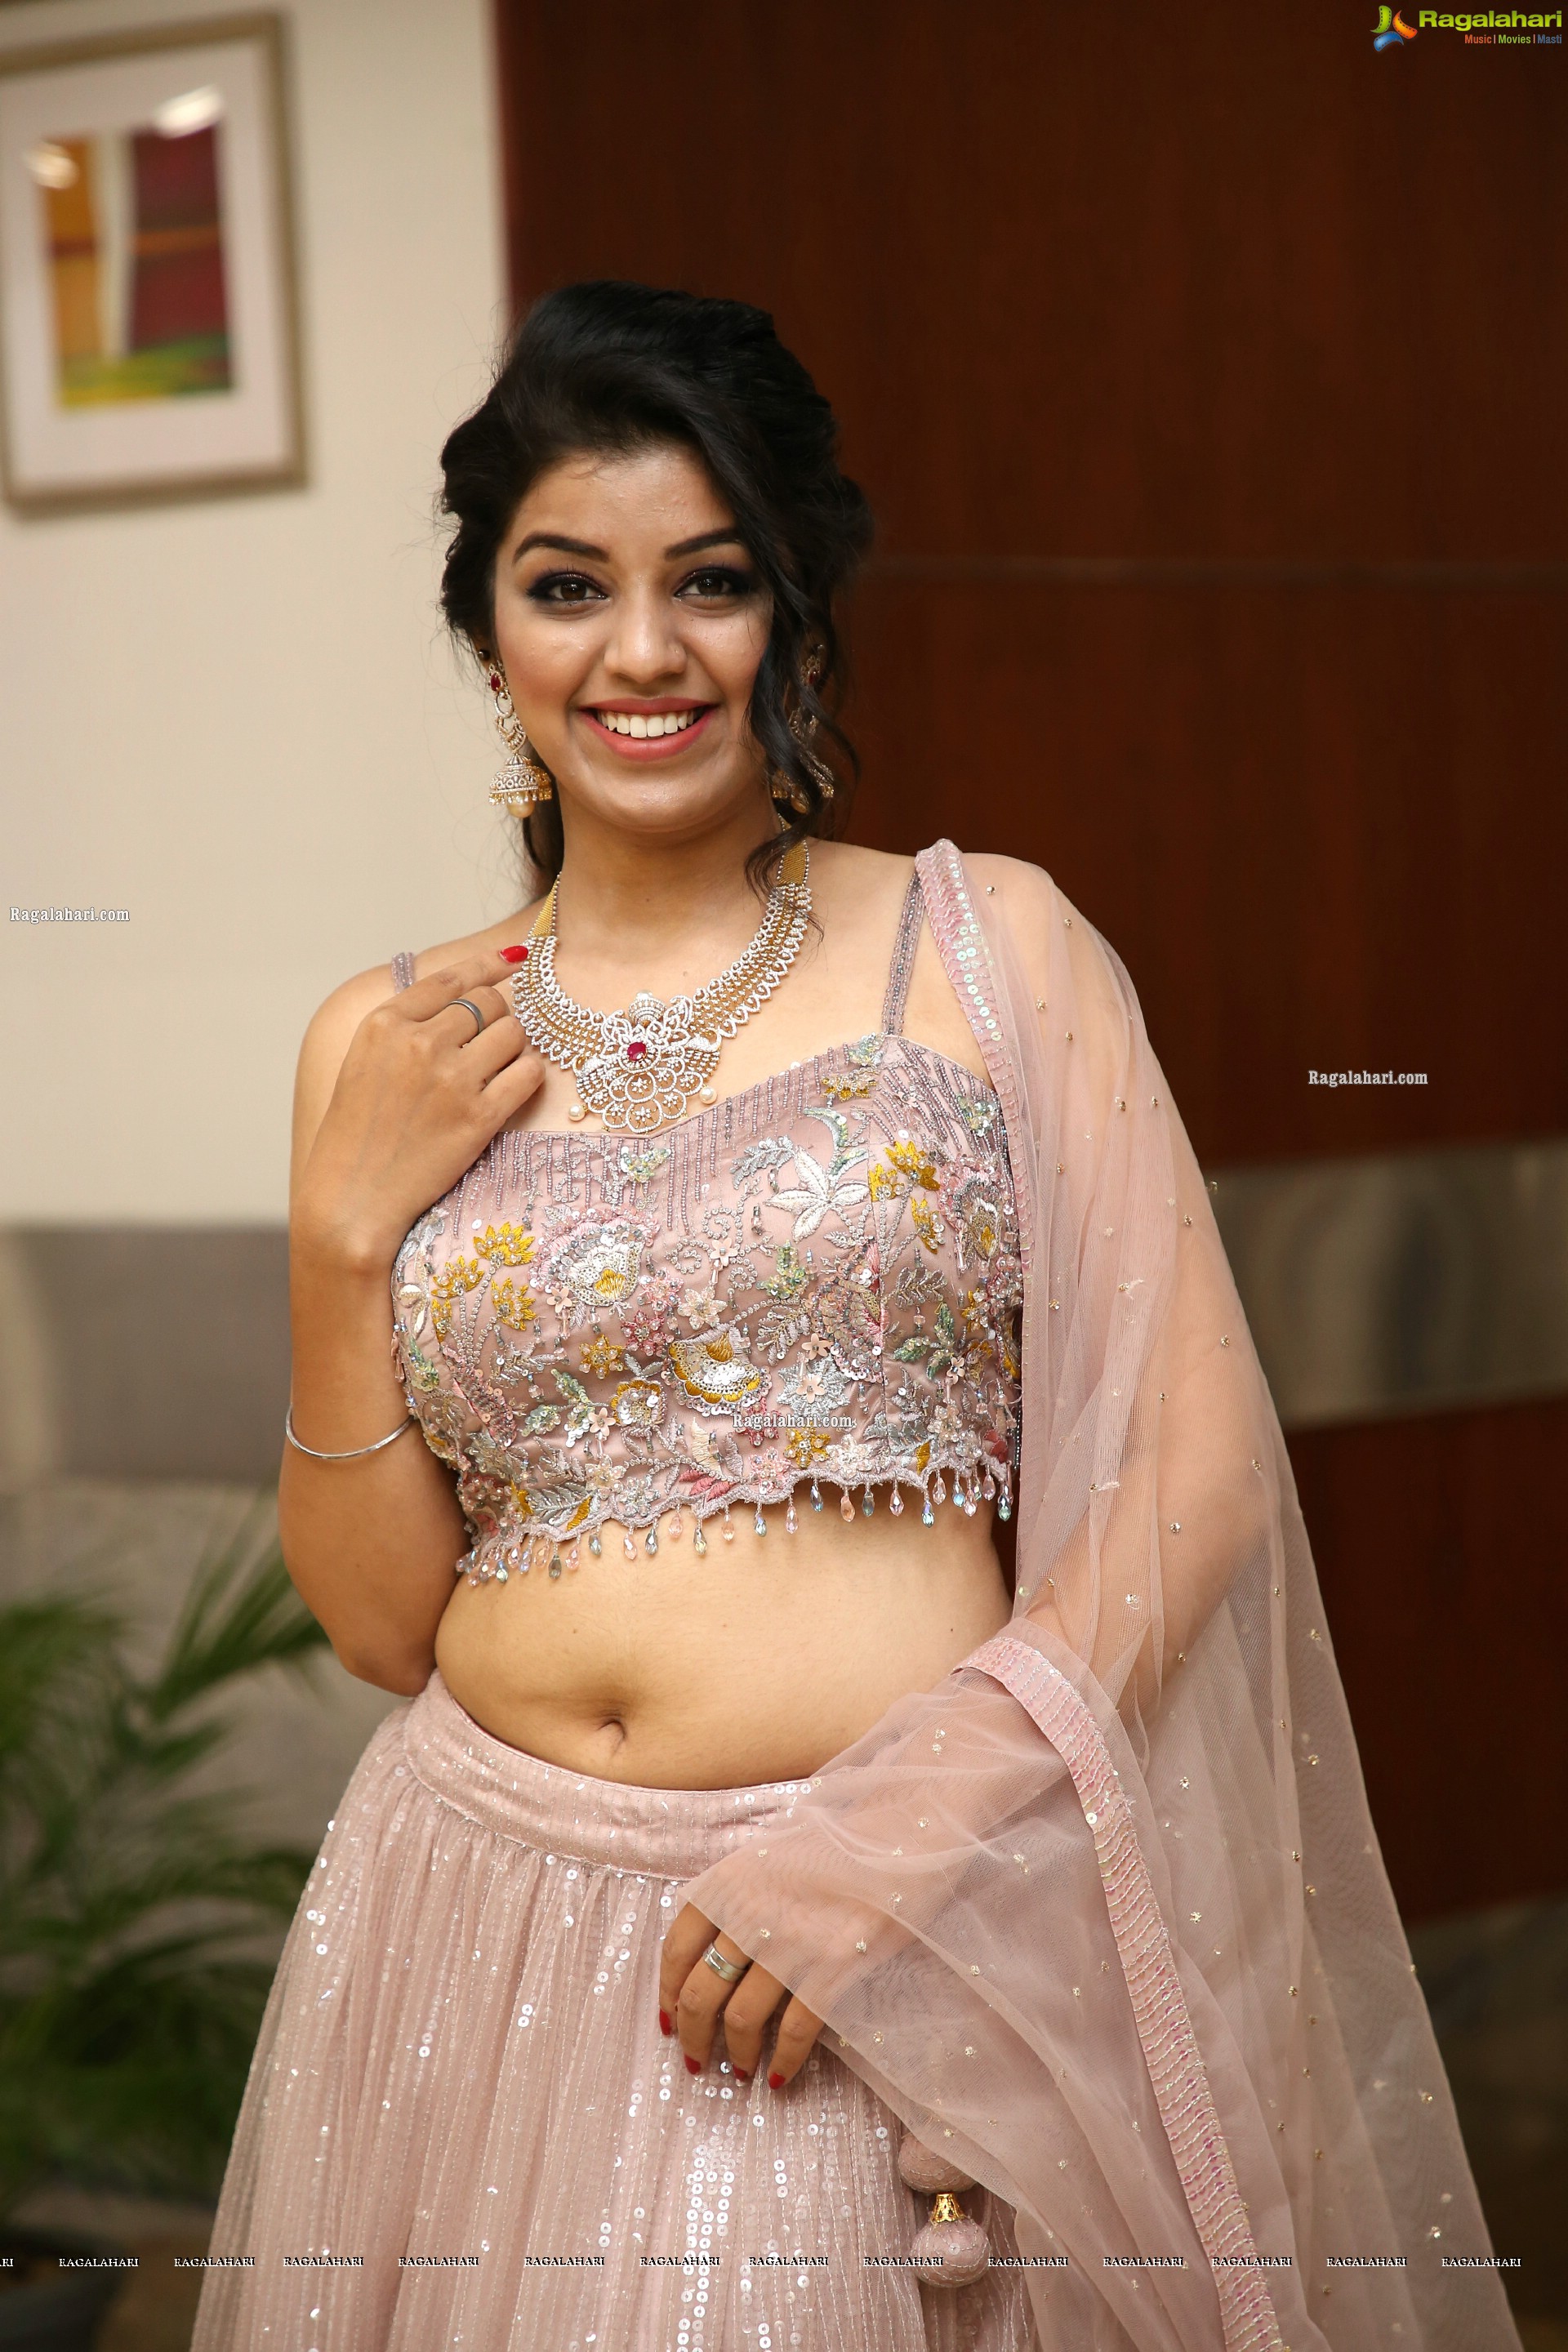 Shruthi Sharma in Traditional Jewellery, HD Photo Gallery